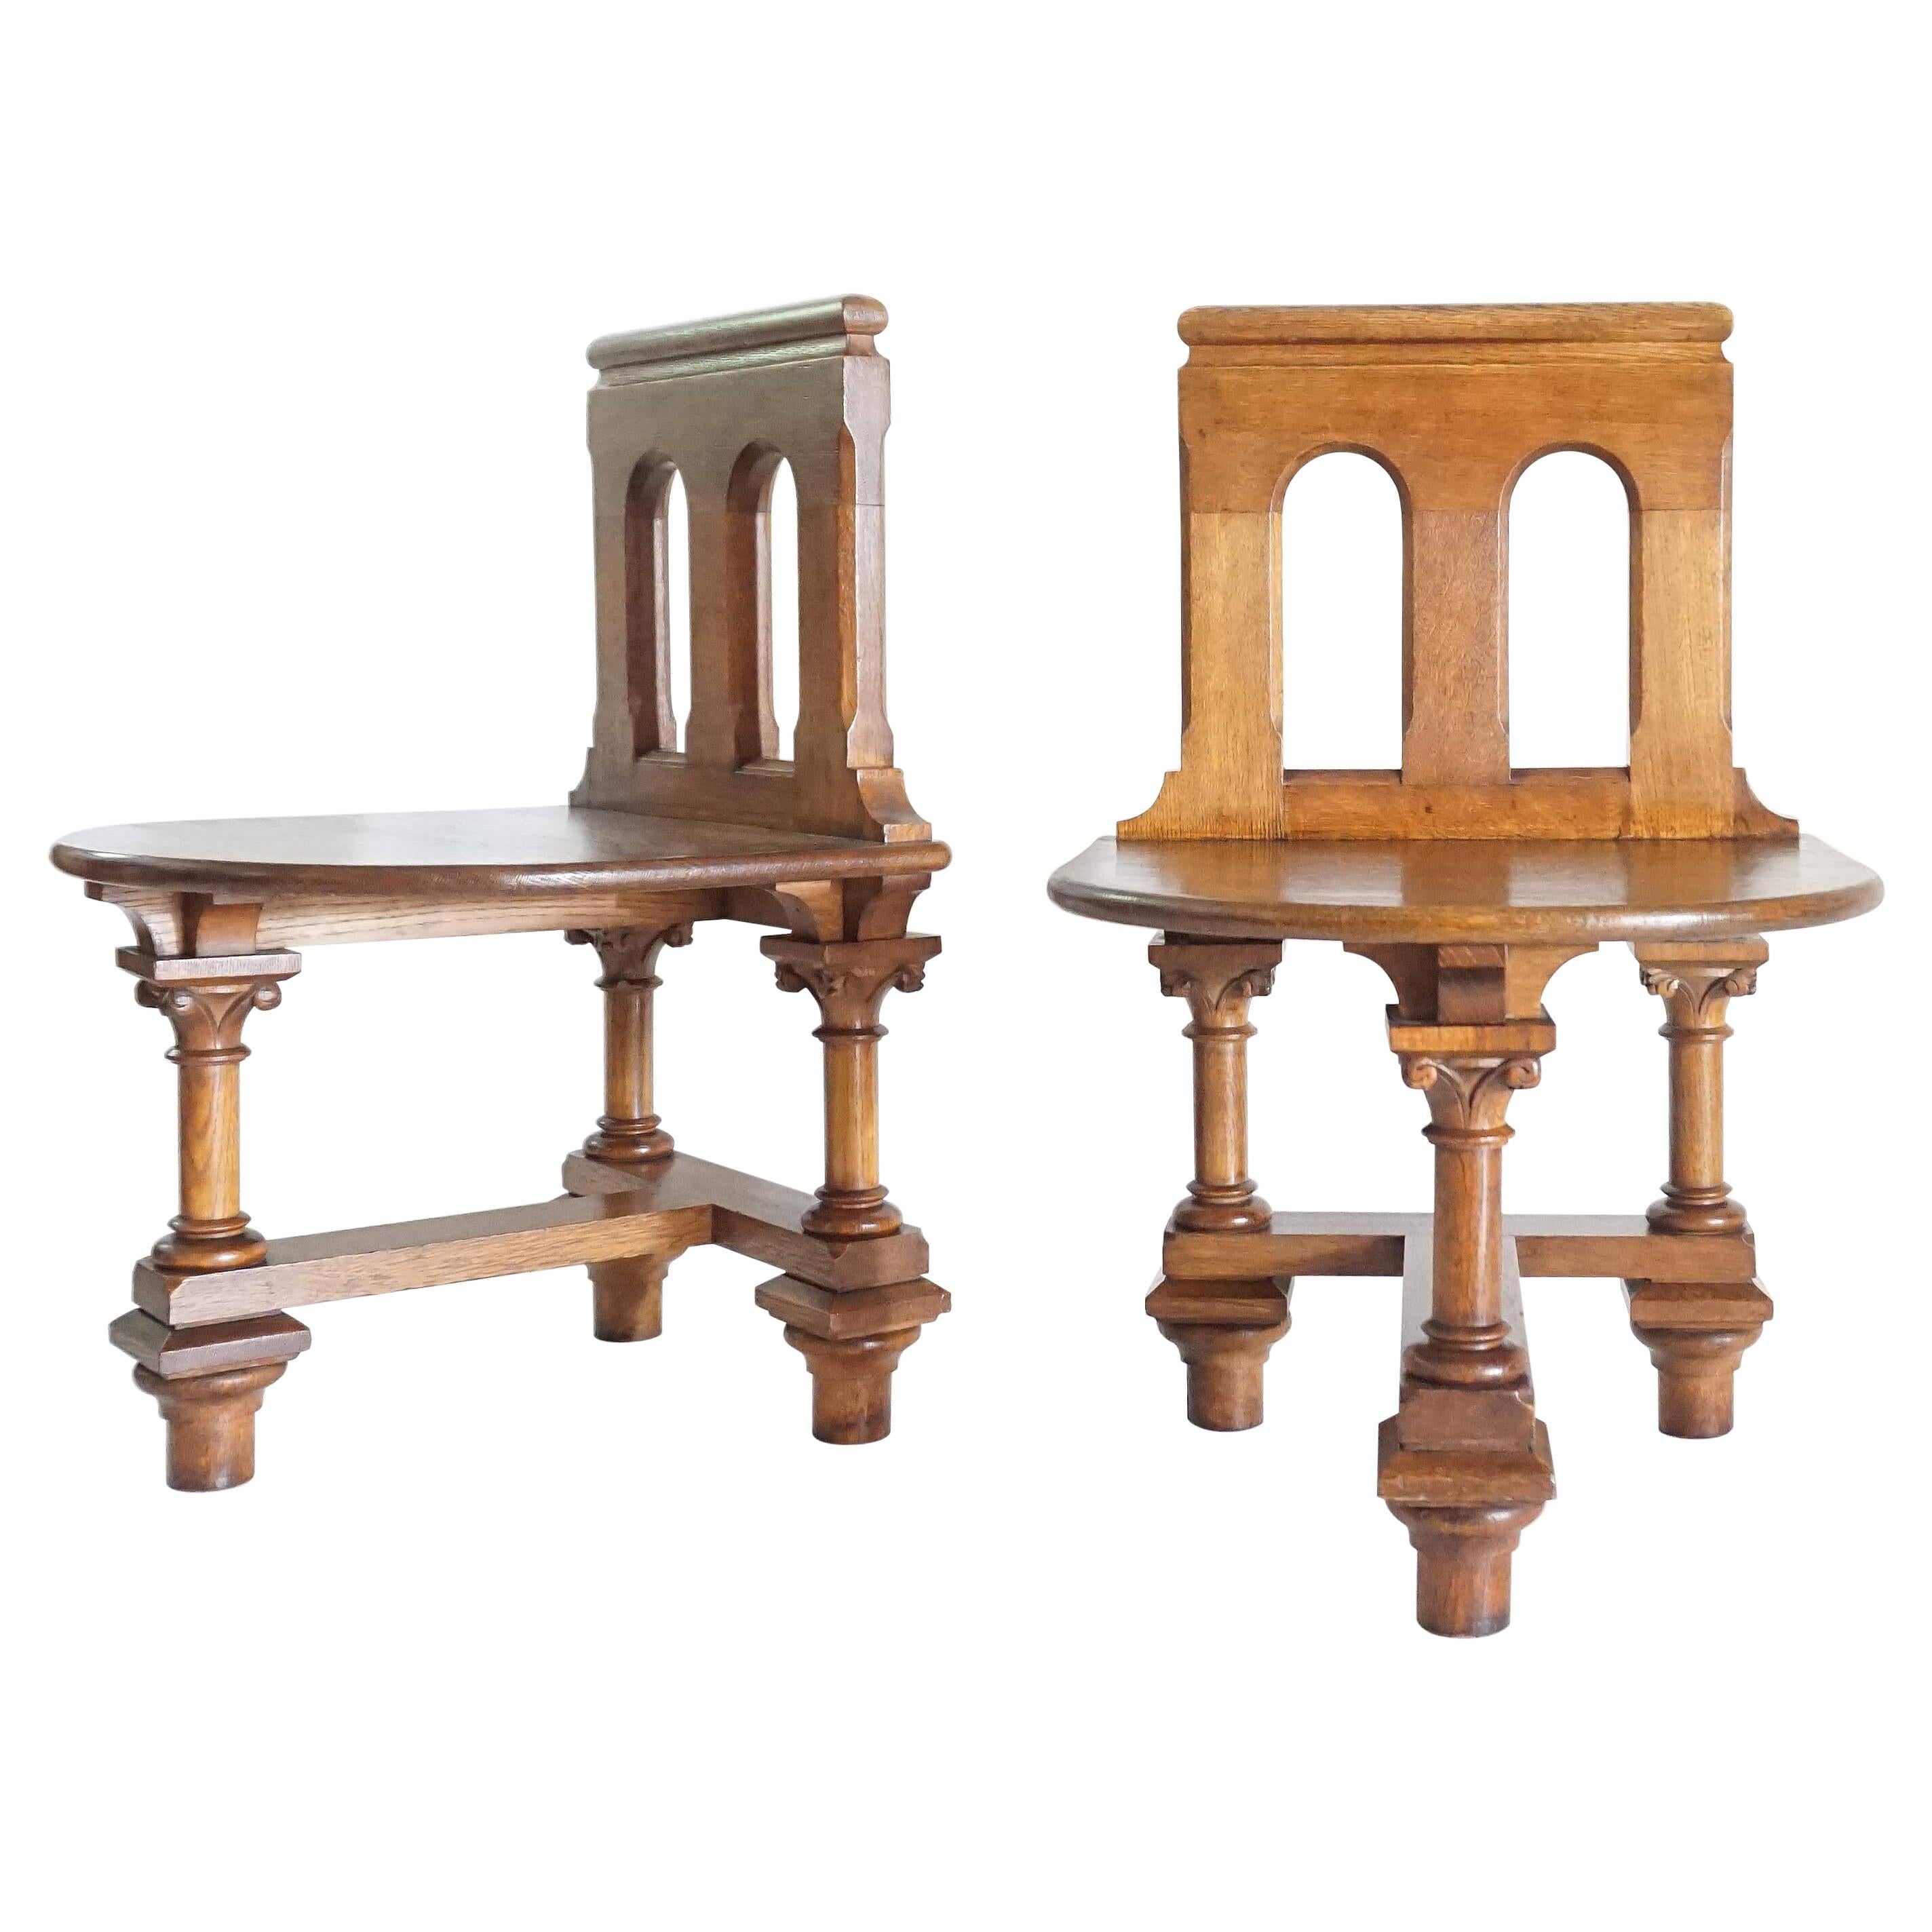 French Romanesque Revival Oak Hall Seats or Chairs, circa 1900 For Sale